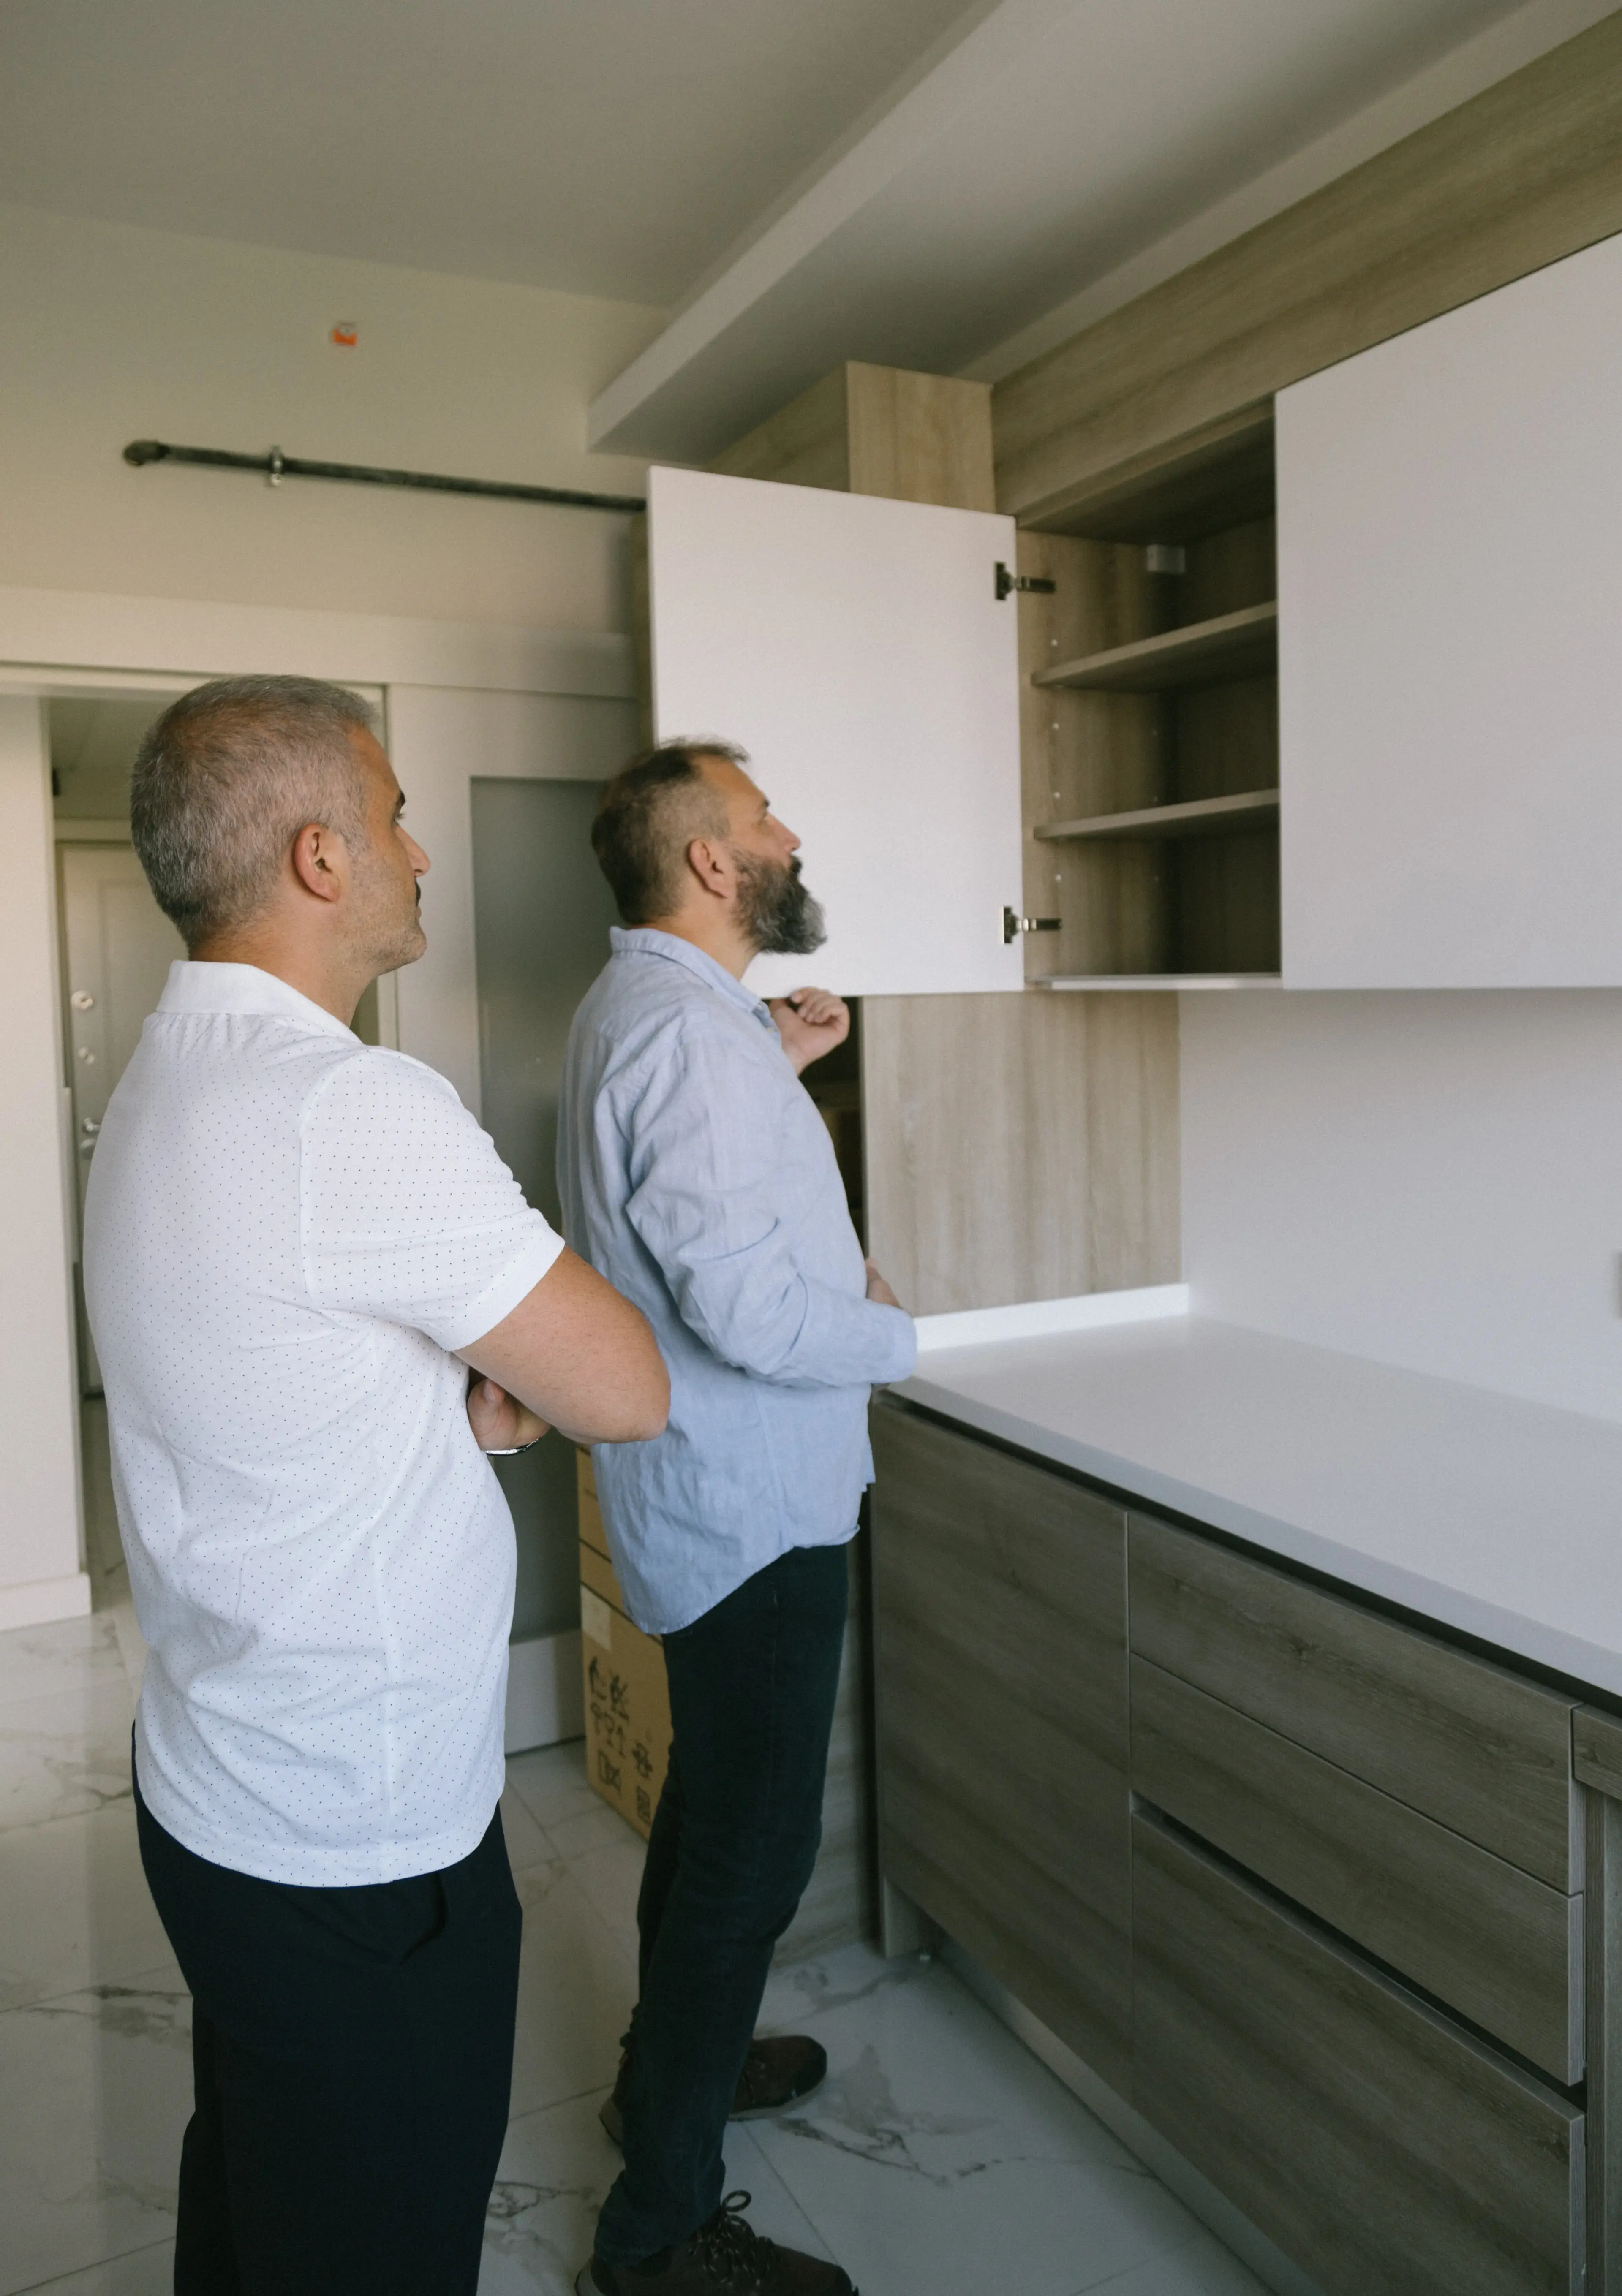 Men Checking the Wooden Cabinet of a House During an Interior Inspection during the Home Inspection